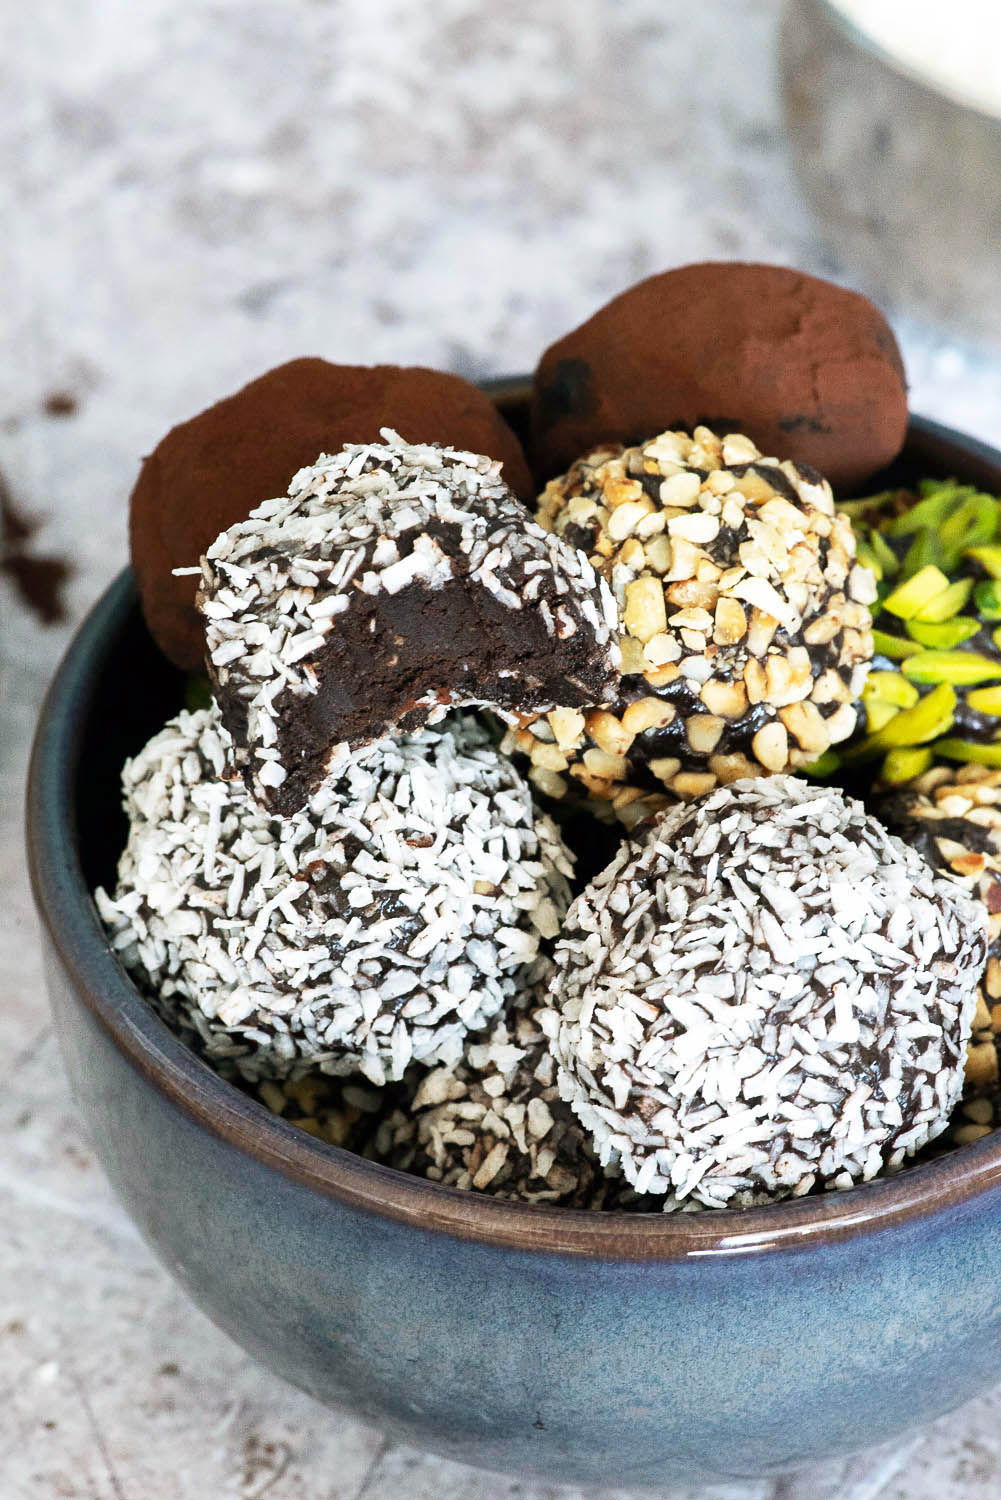 No-Bake Almond Butter and Cacao Energy Balls | Paleo, gluten-free, dairy-free and vegan